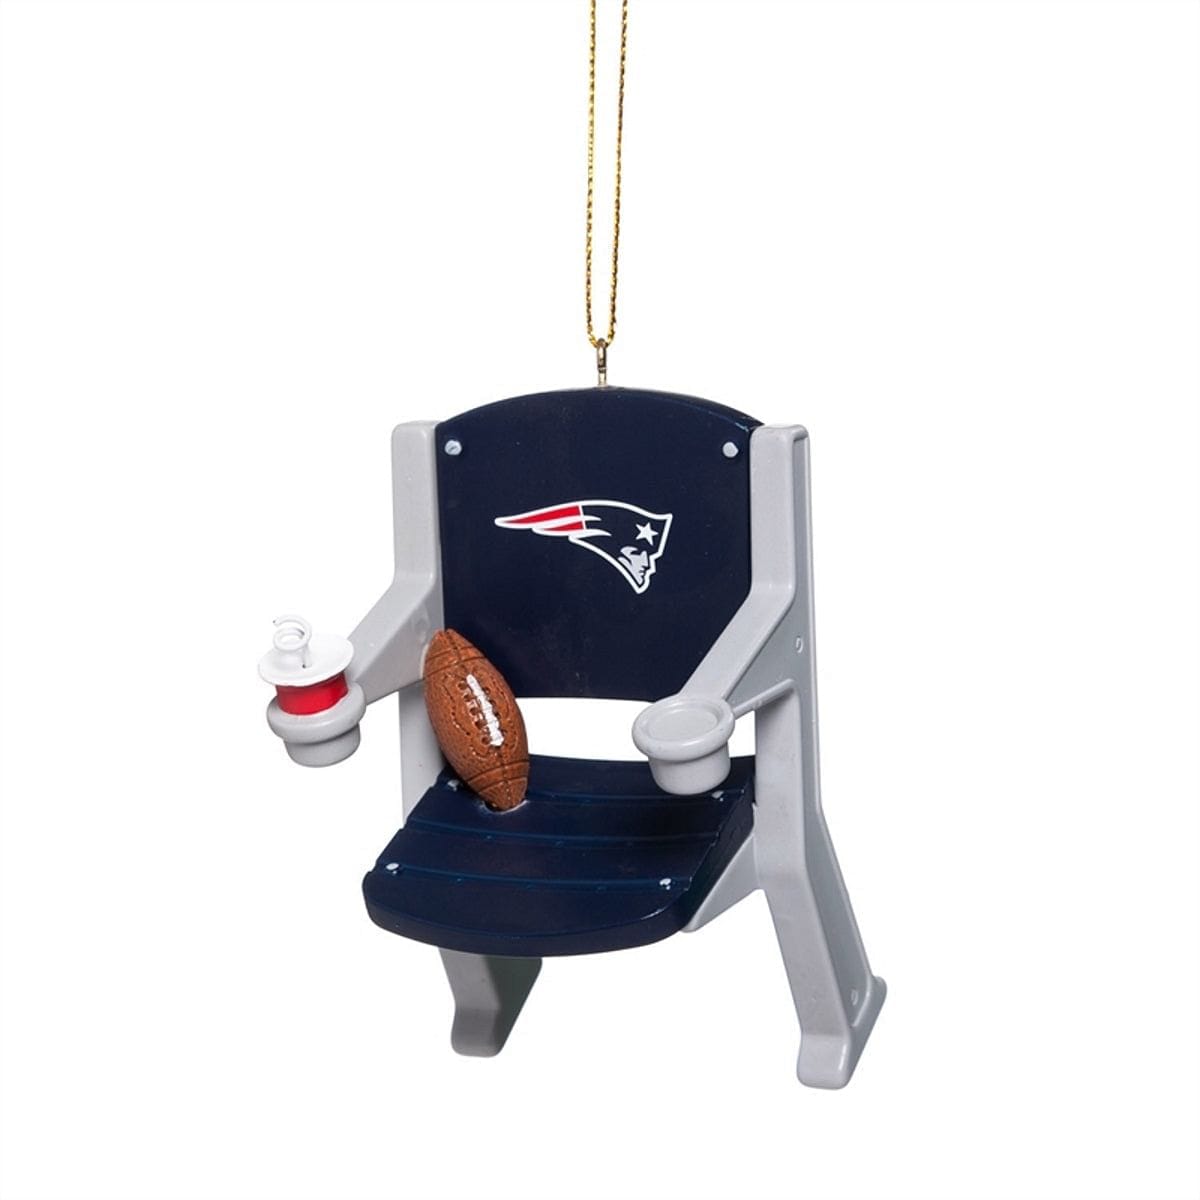 Stadium Chair Ornament, New England Patriots - Shelburne Country Store